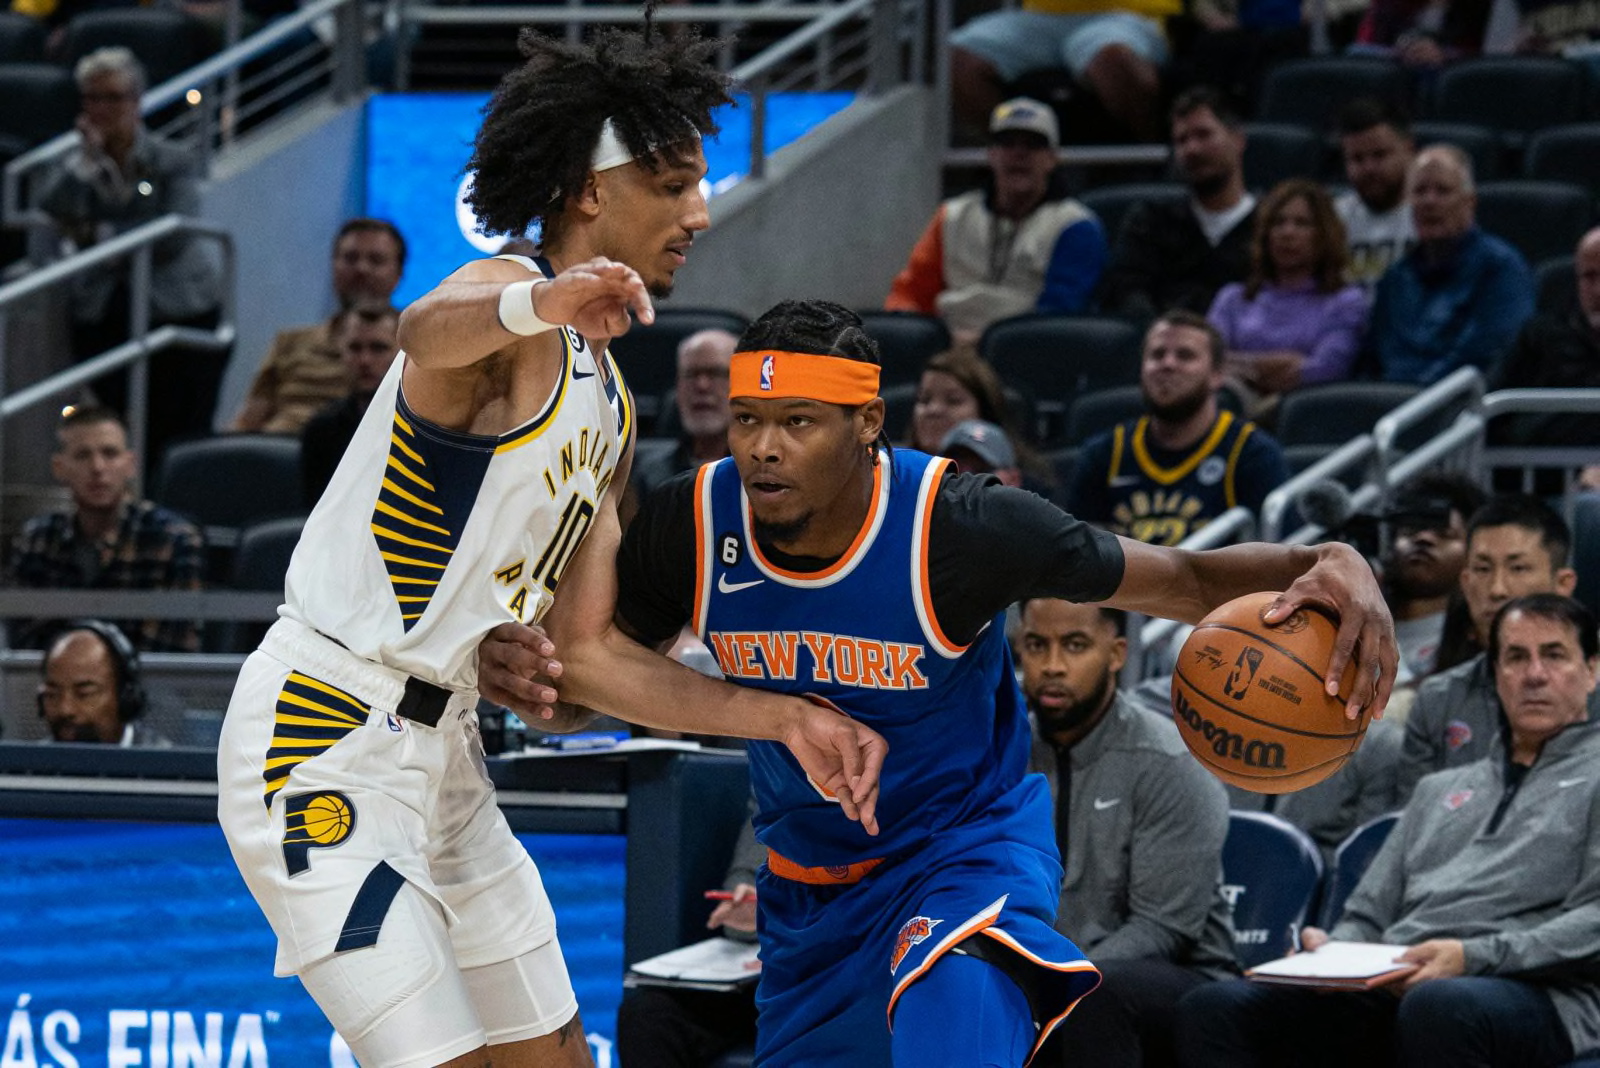 Pacers to acquire Obi Toppin from Knicks for 2nd-rounders per report